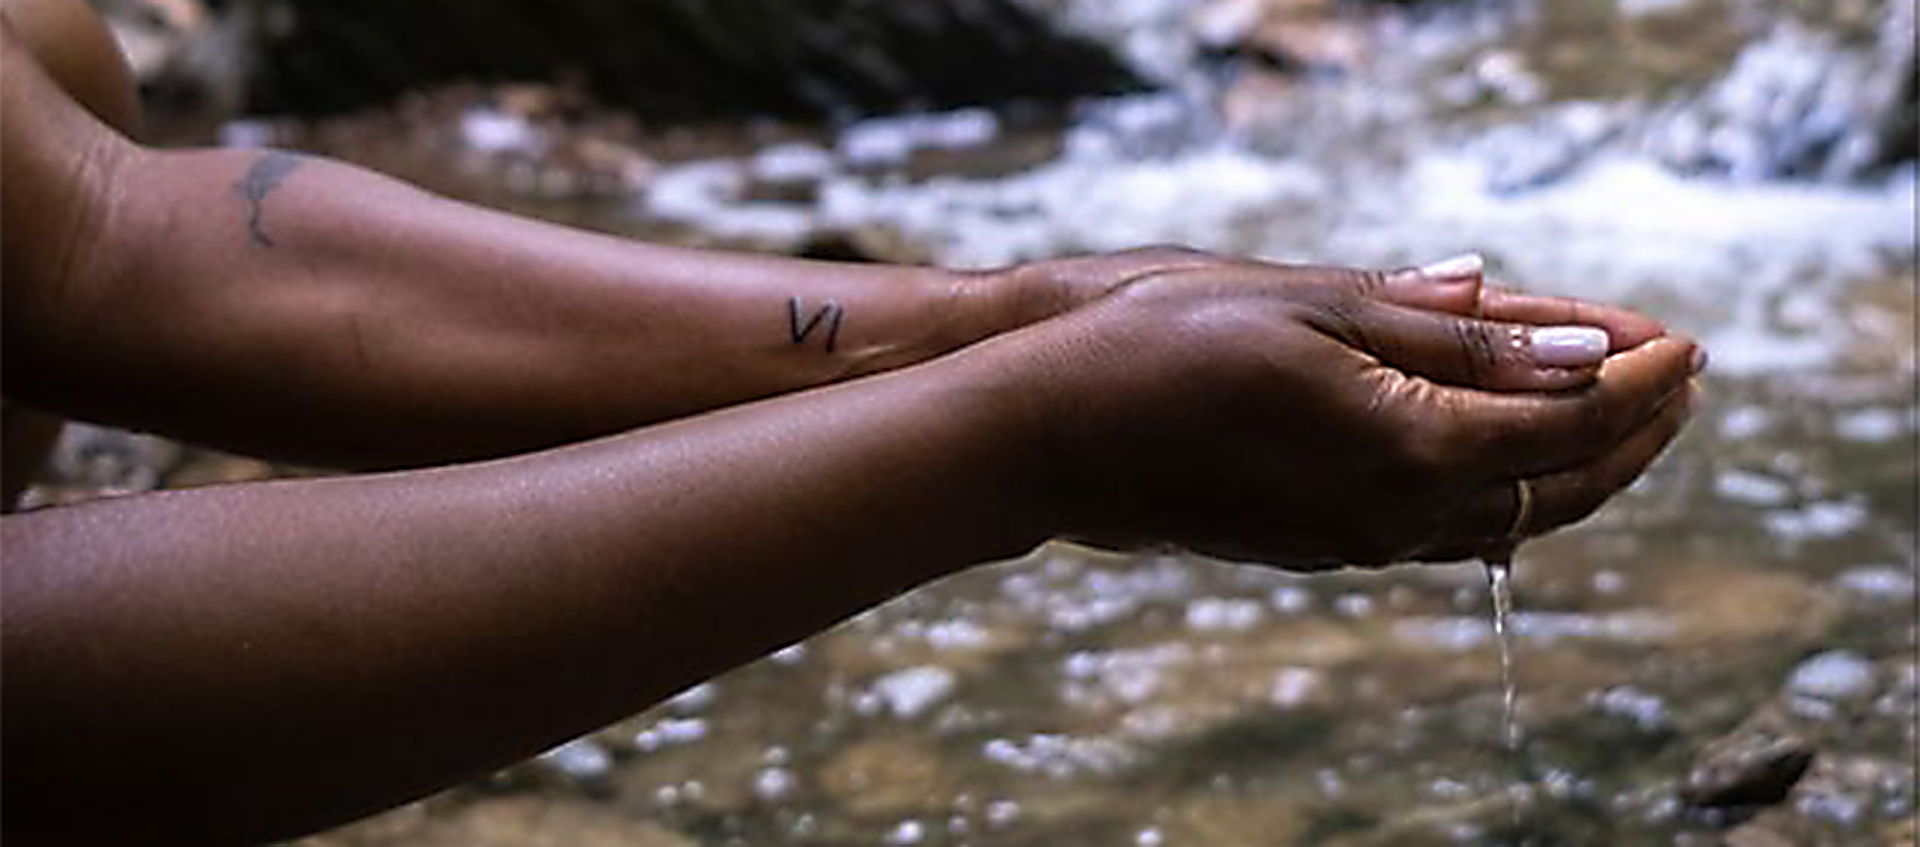 A person’s arms with dark brown skin are outstretched, and their hands are cupping water from a stream visible in the background